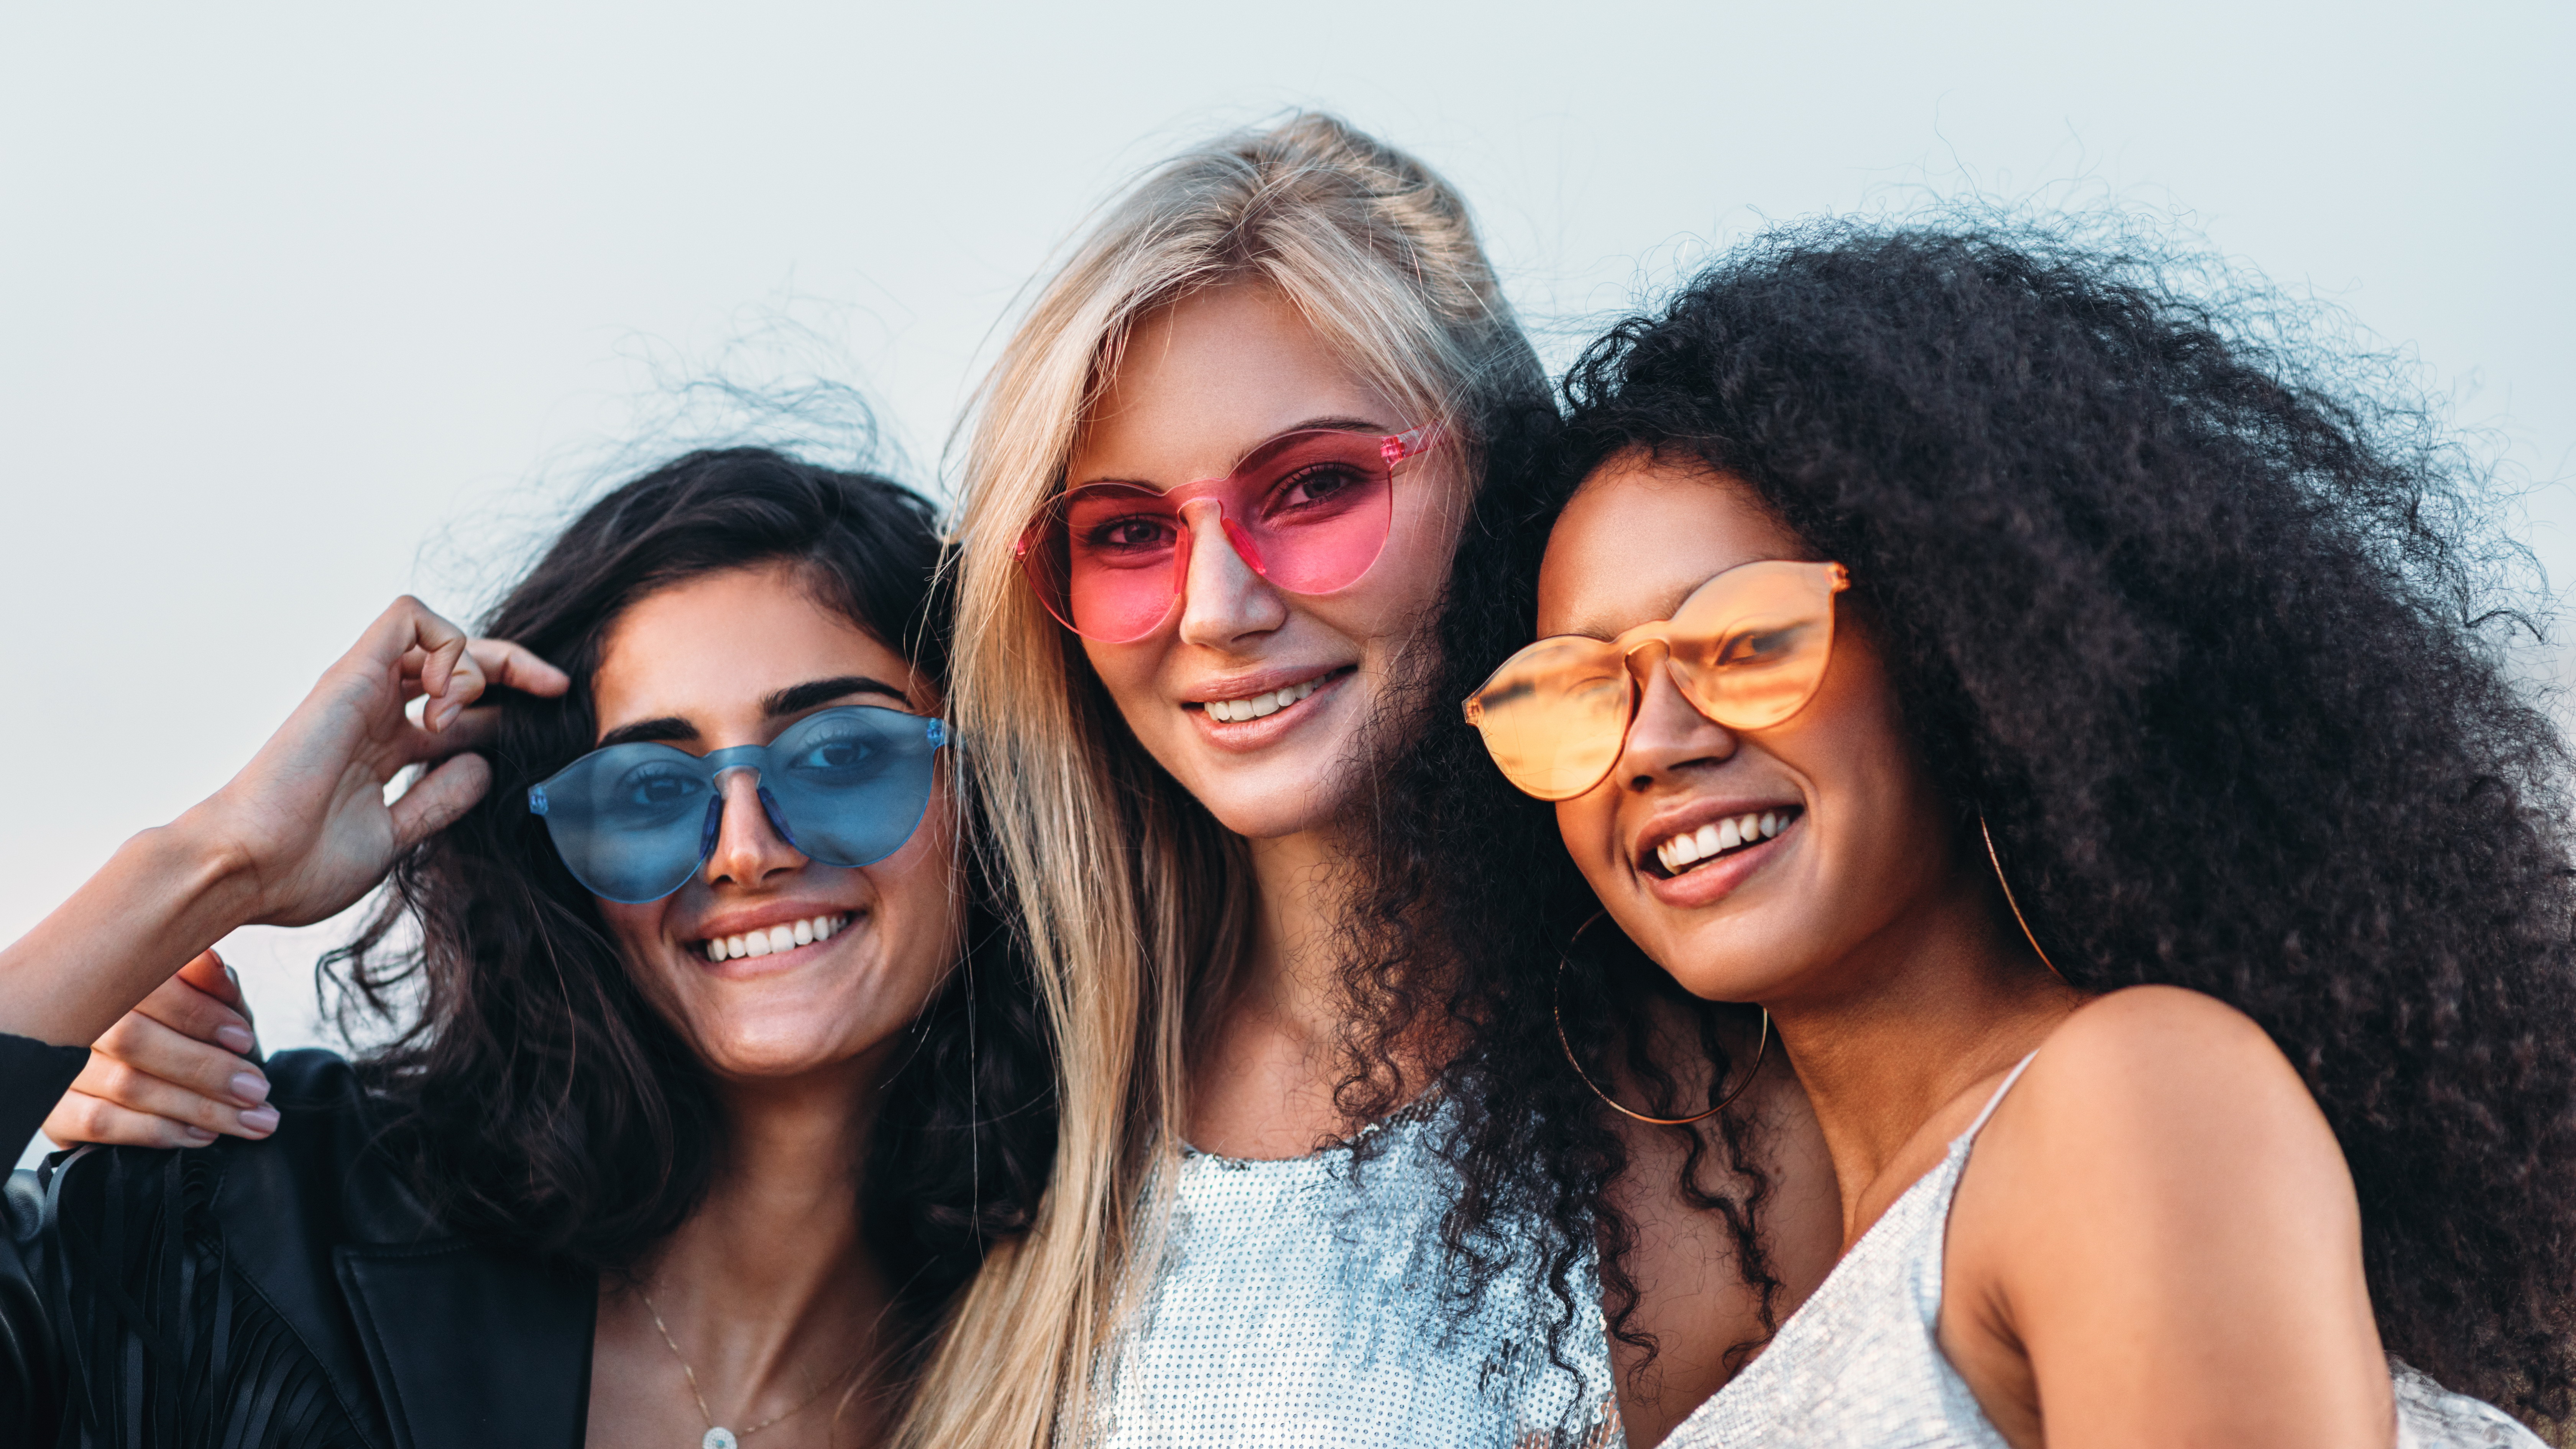 Sunglasses 2021: Early Predictions on This Year's Fashions